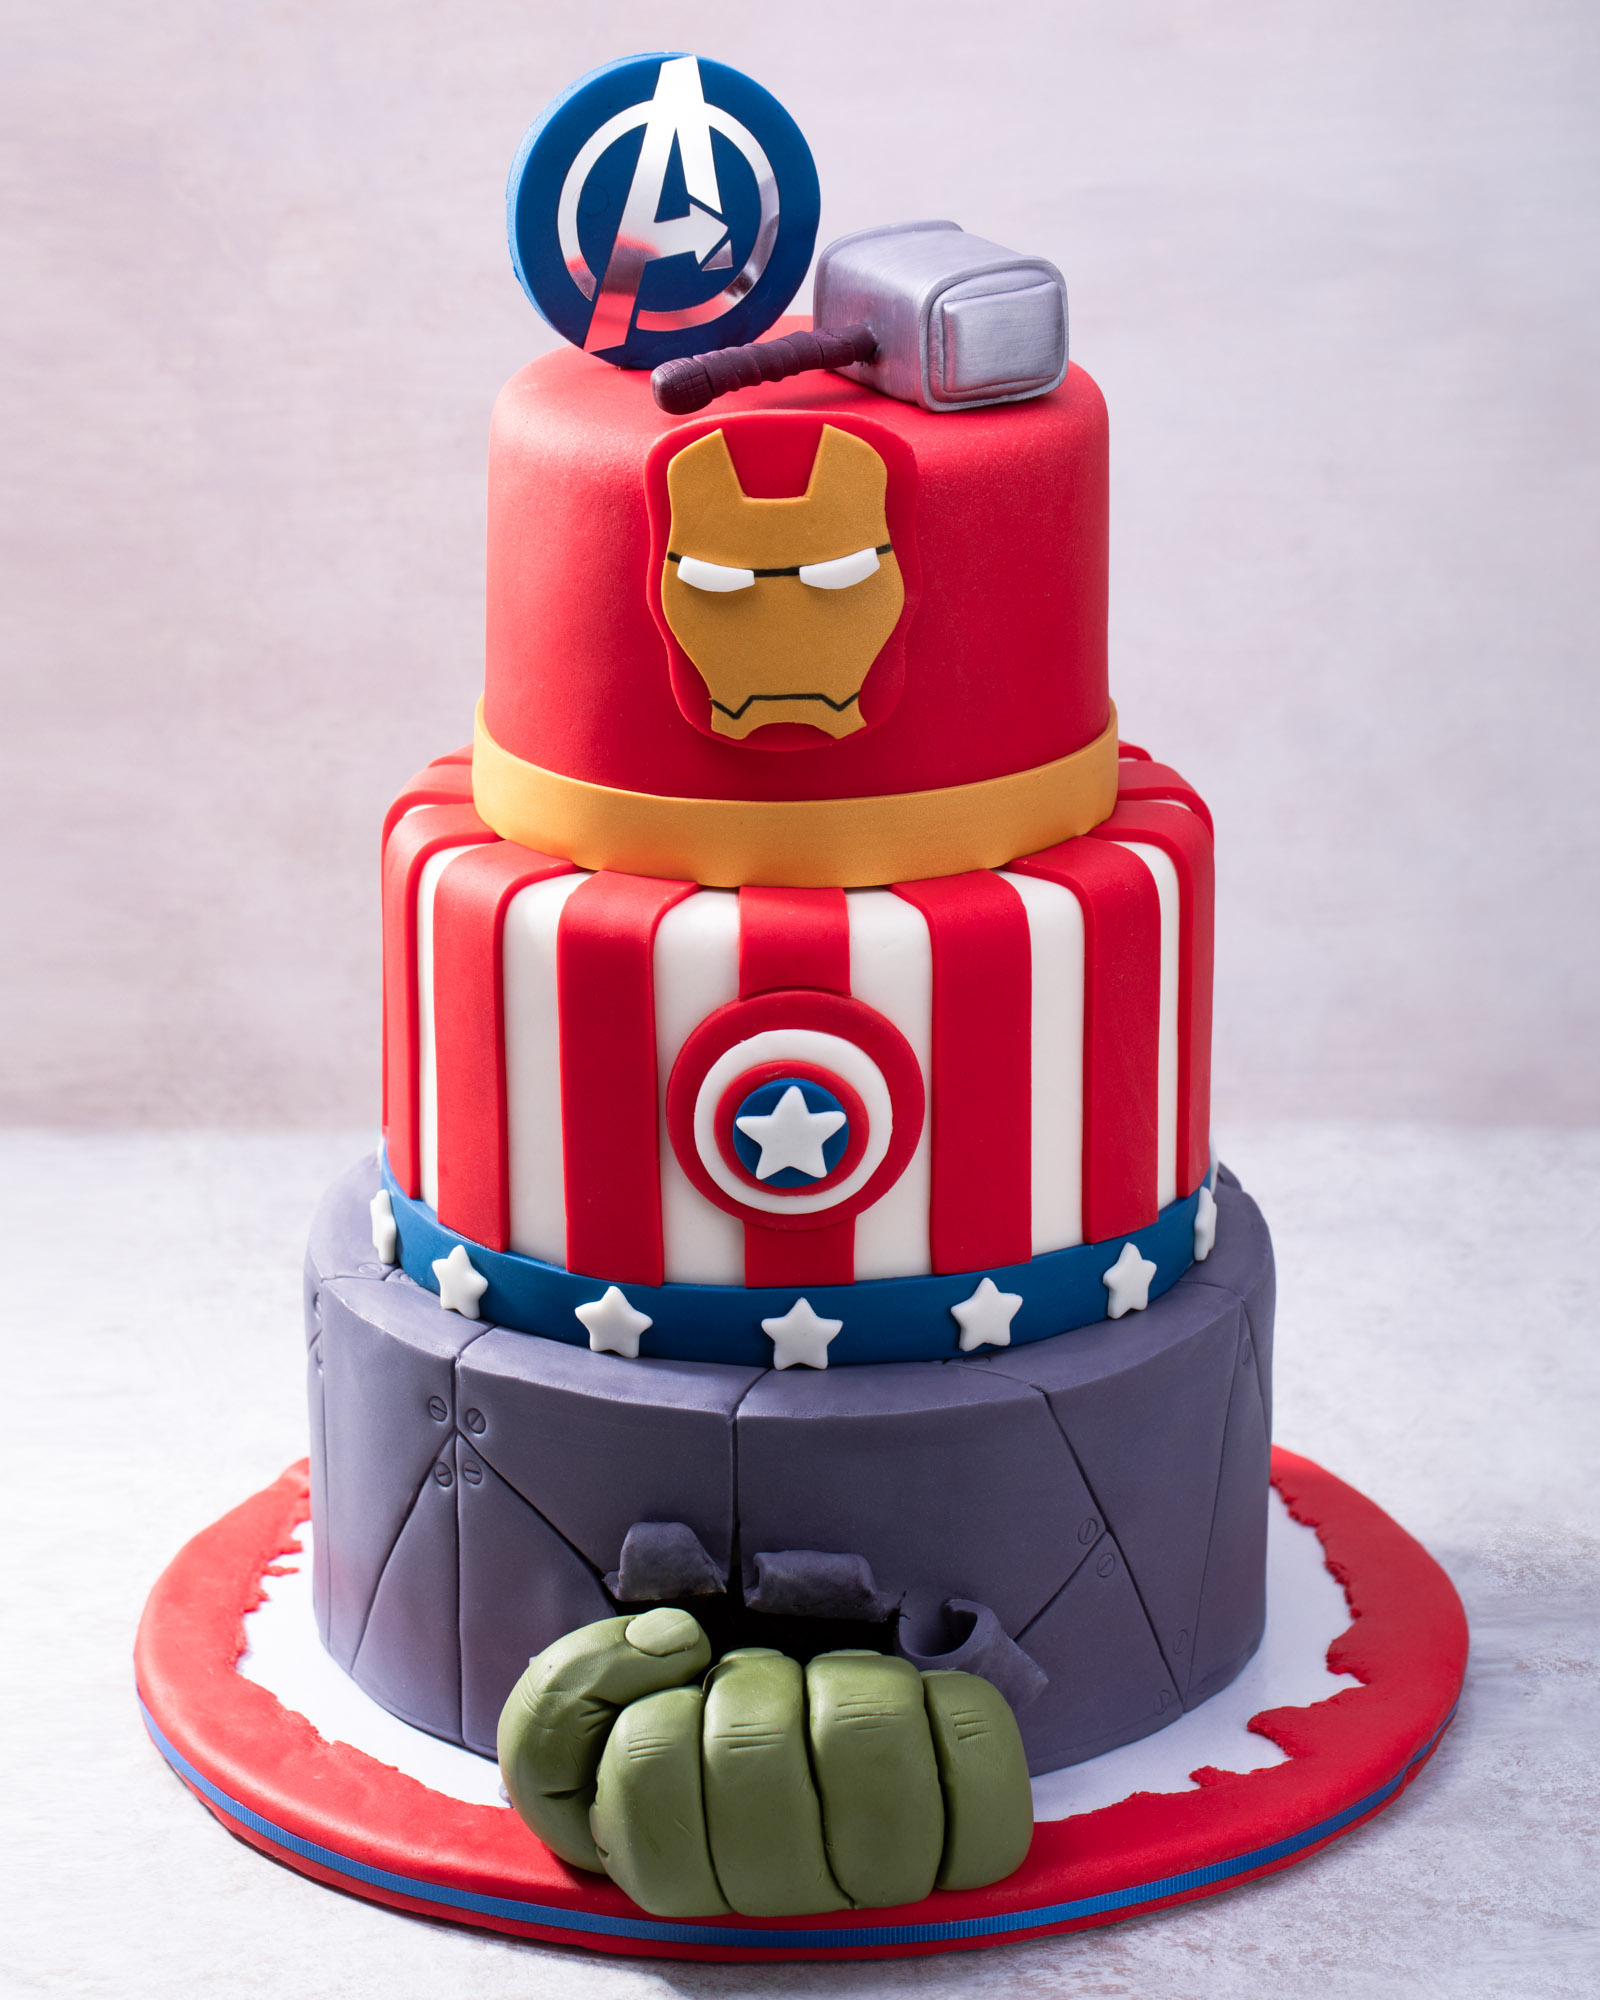 Marvels Avengers Cake Topper Personalised Printed on Icing sizes inc Costco  | eBay